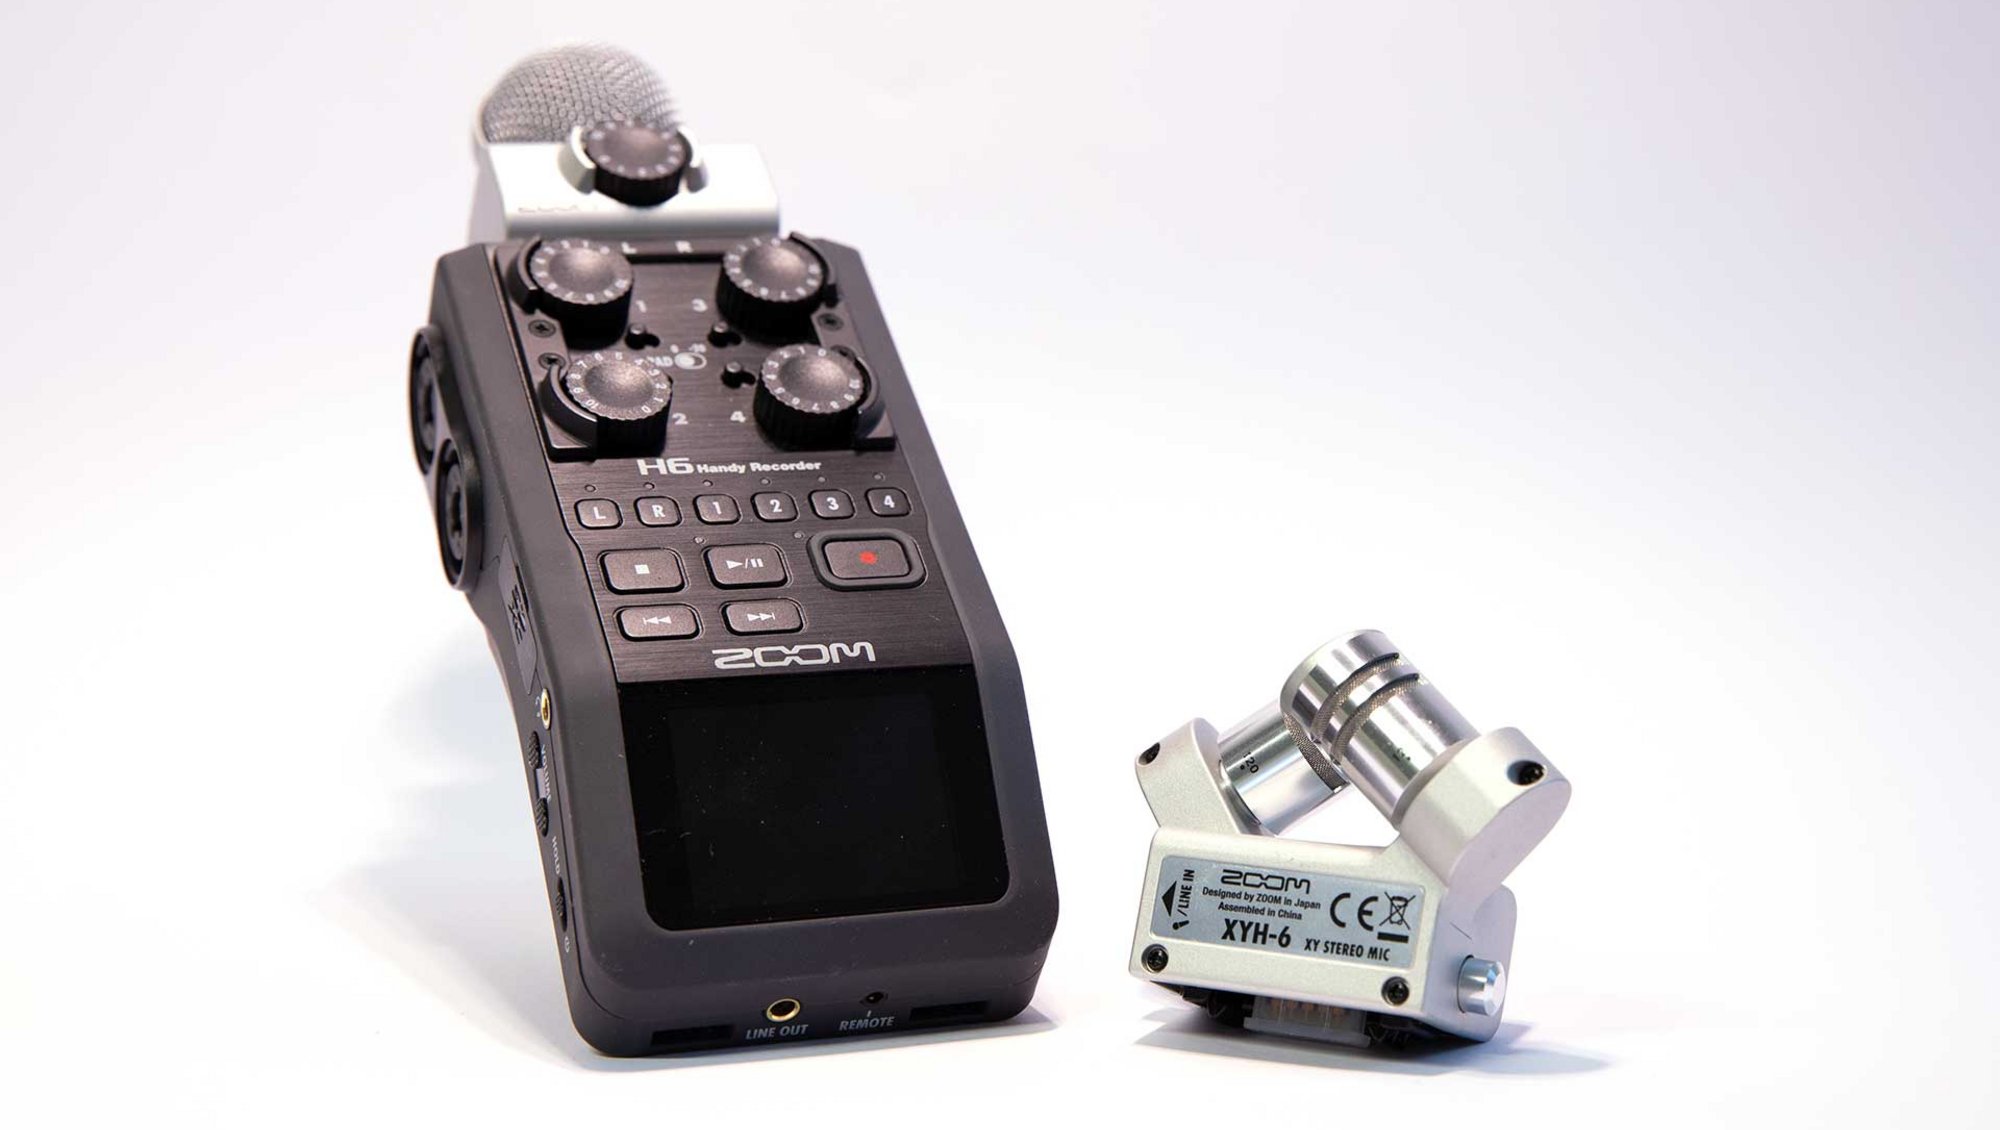 [Translate to English:] Zoom H6 audio recorder